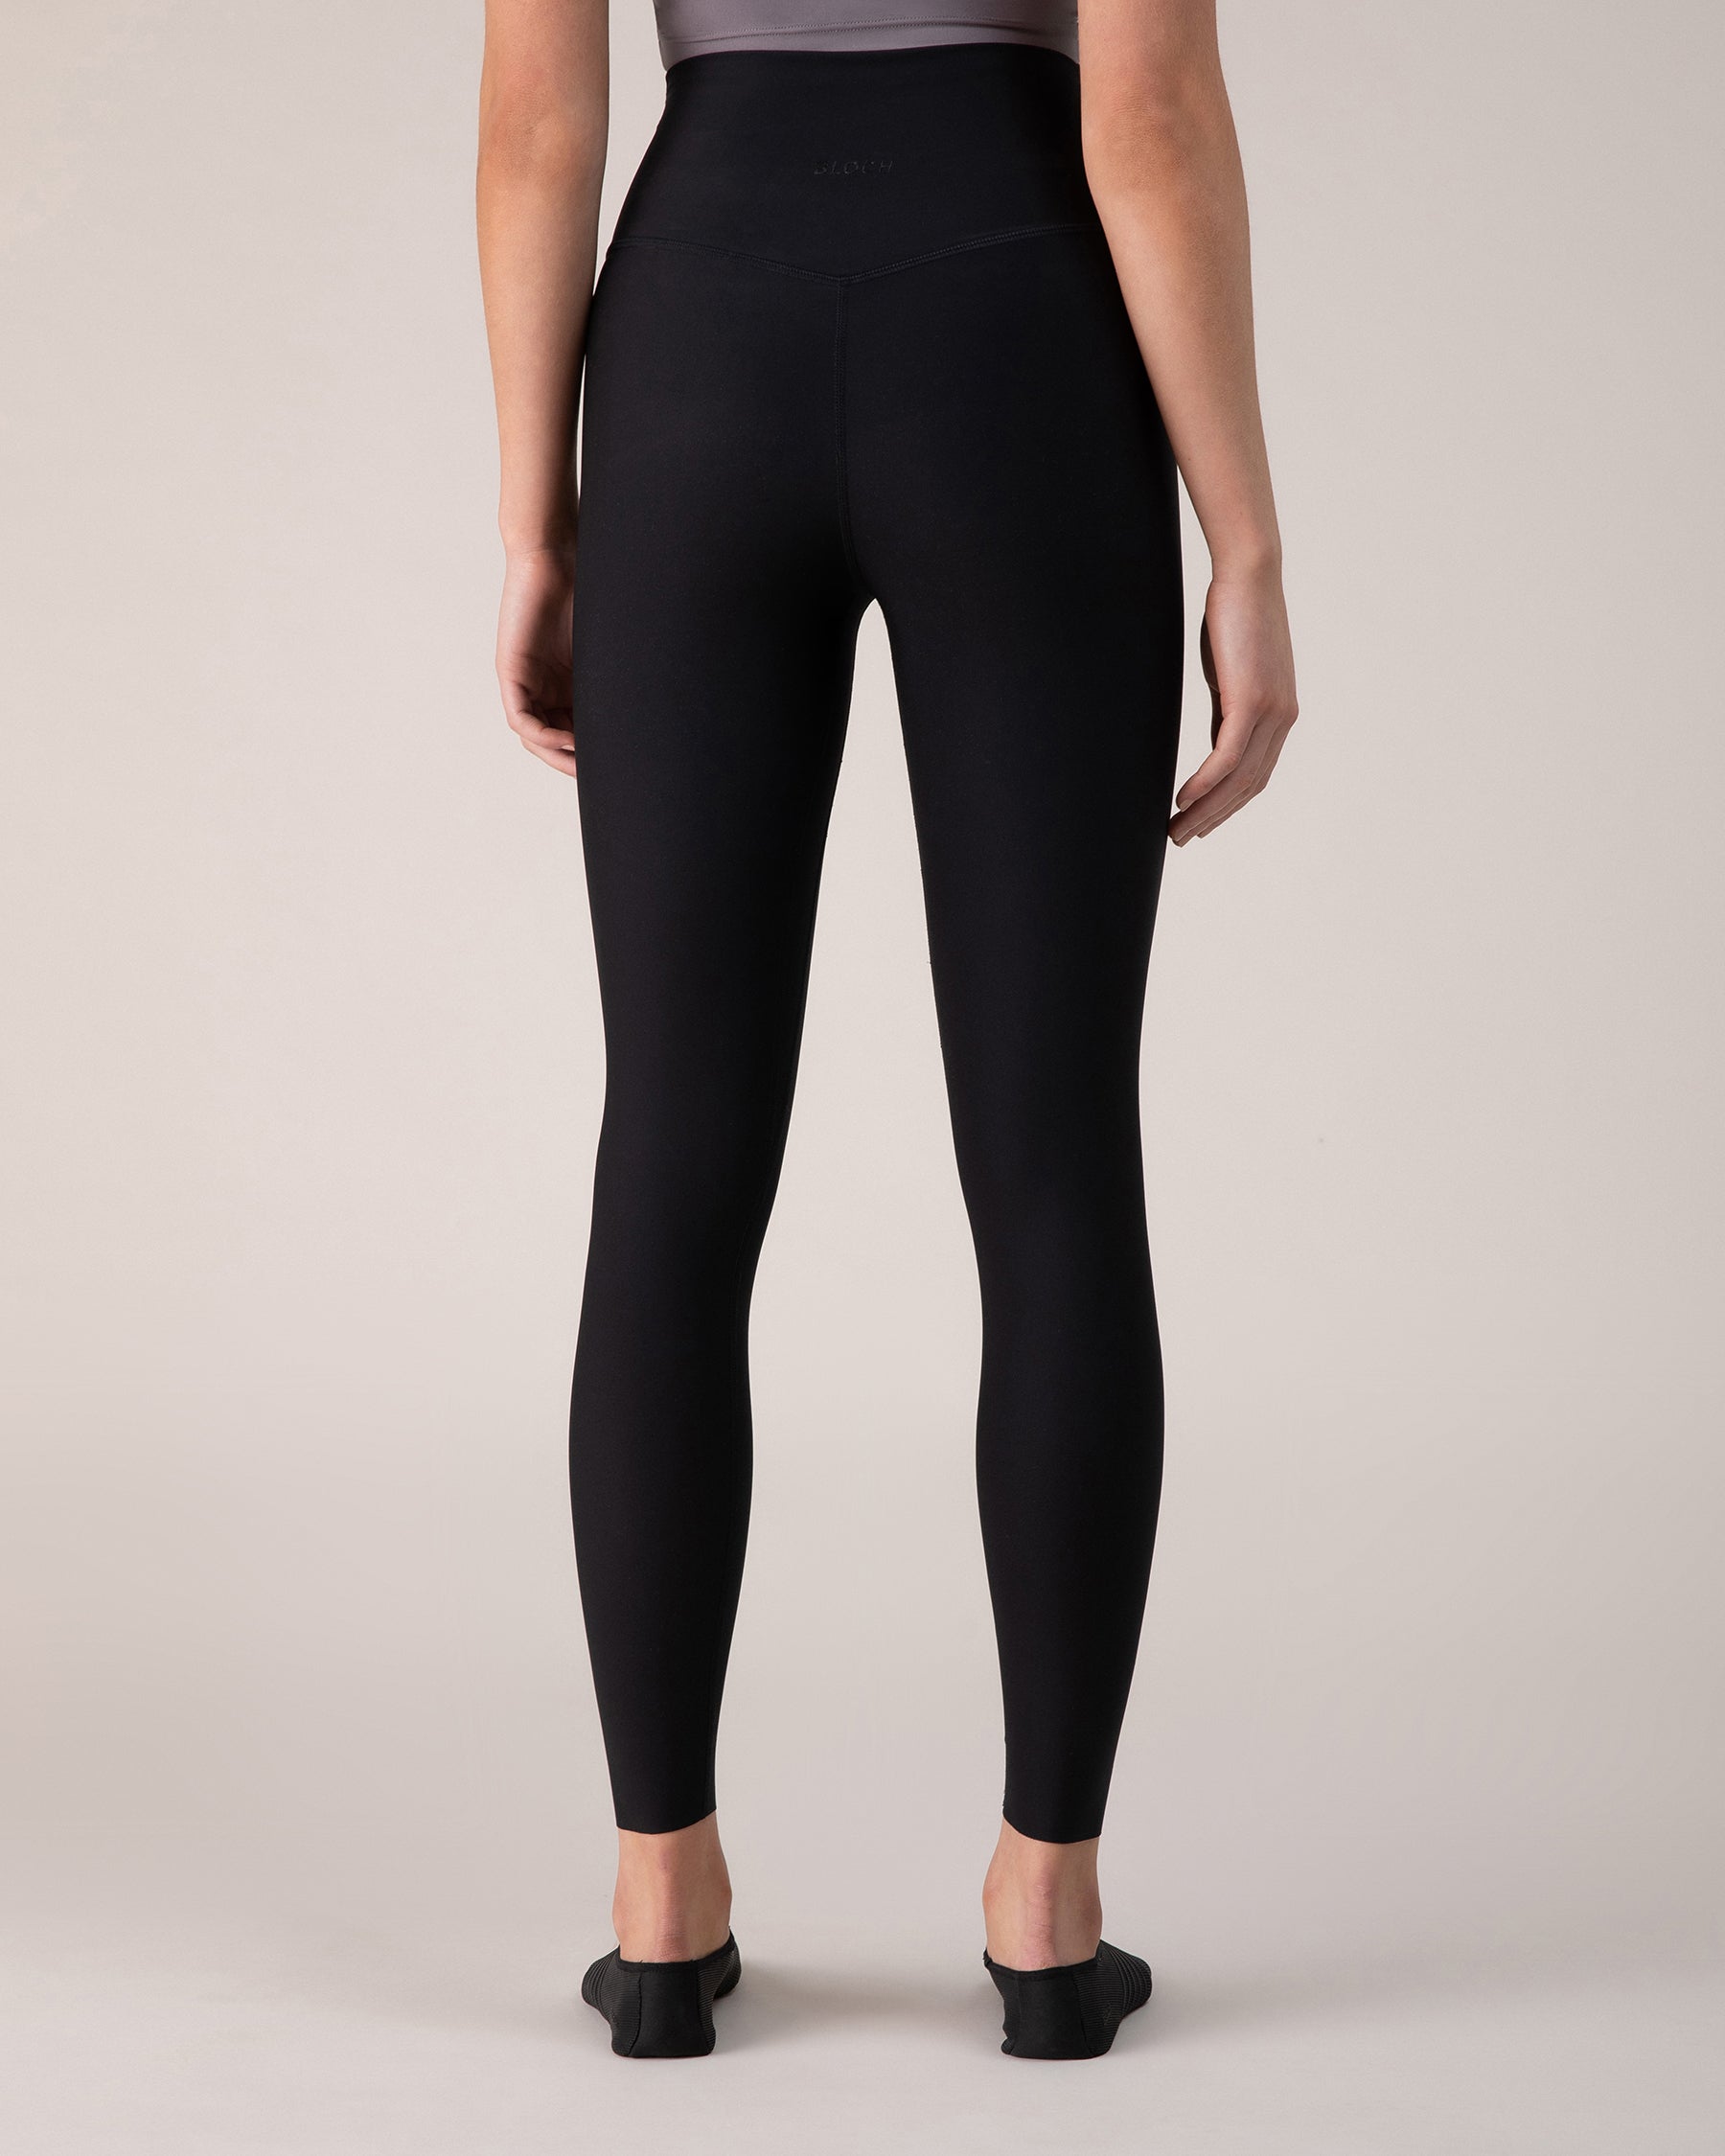 Juicy Couture Girls 7-16 Ombre Pull-on Stretch Leggings - 8/10 / Black